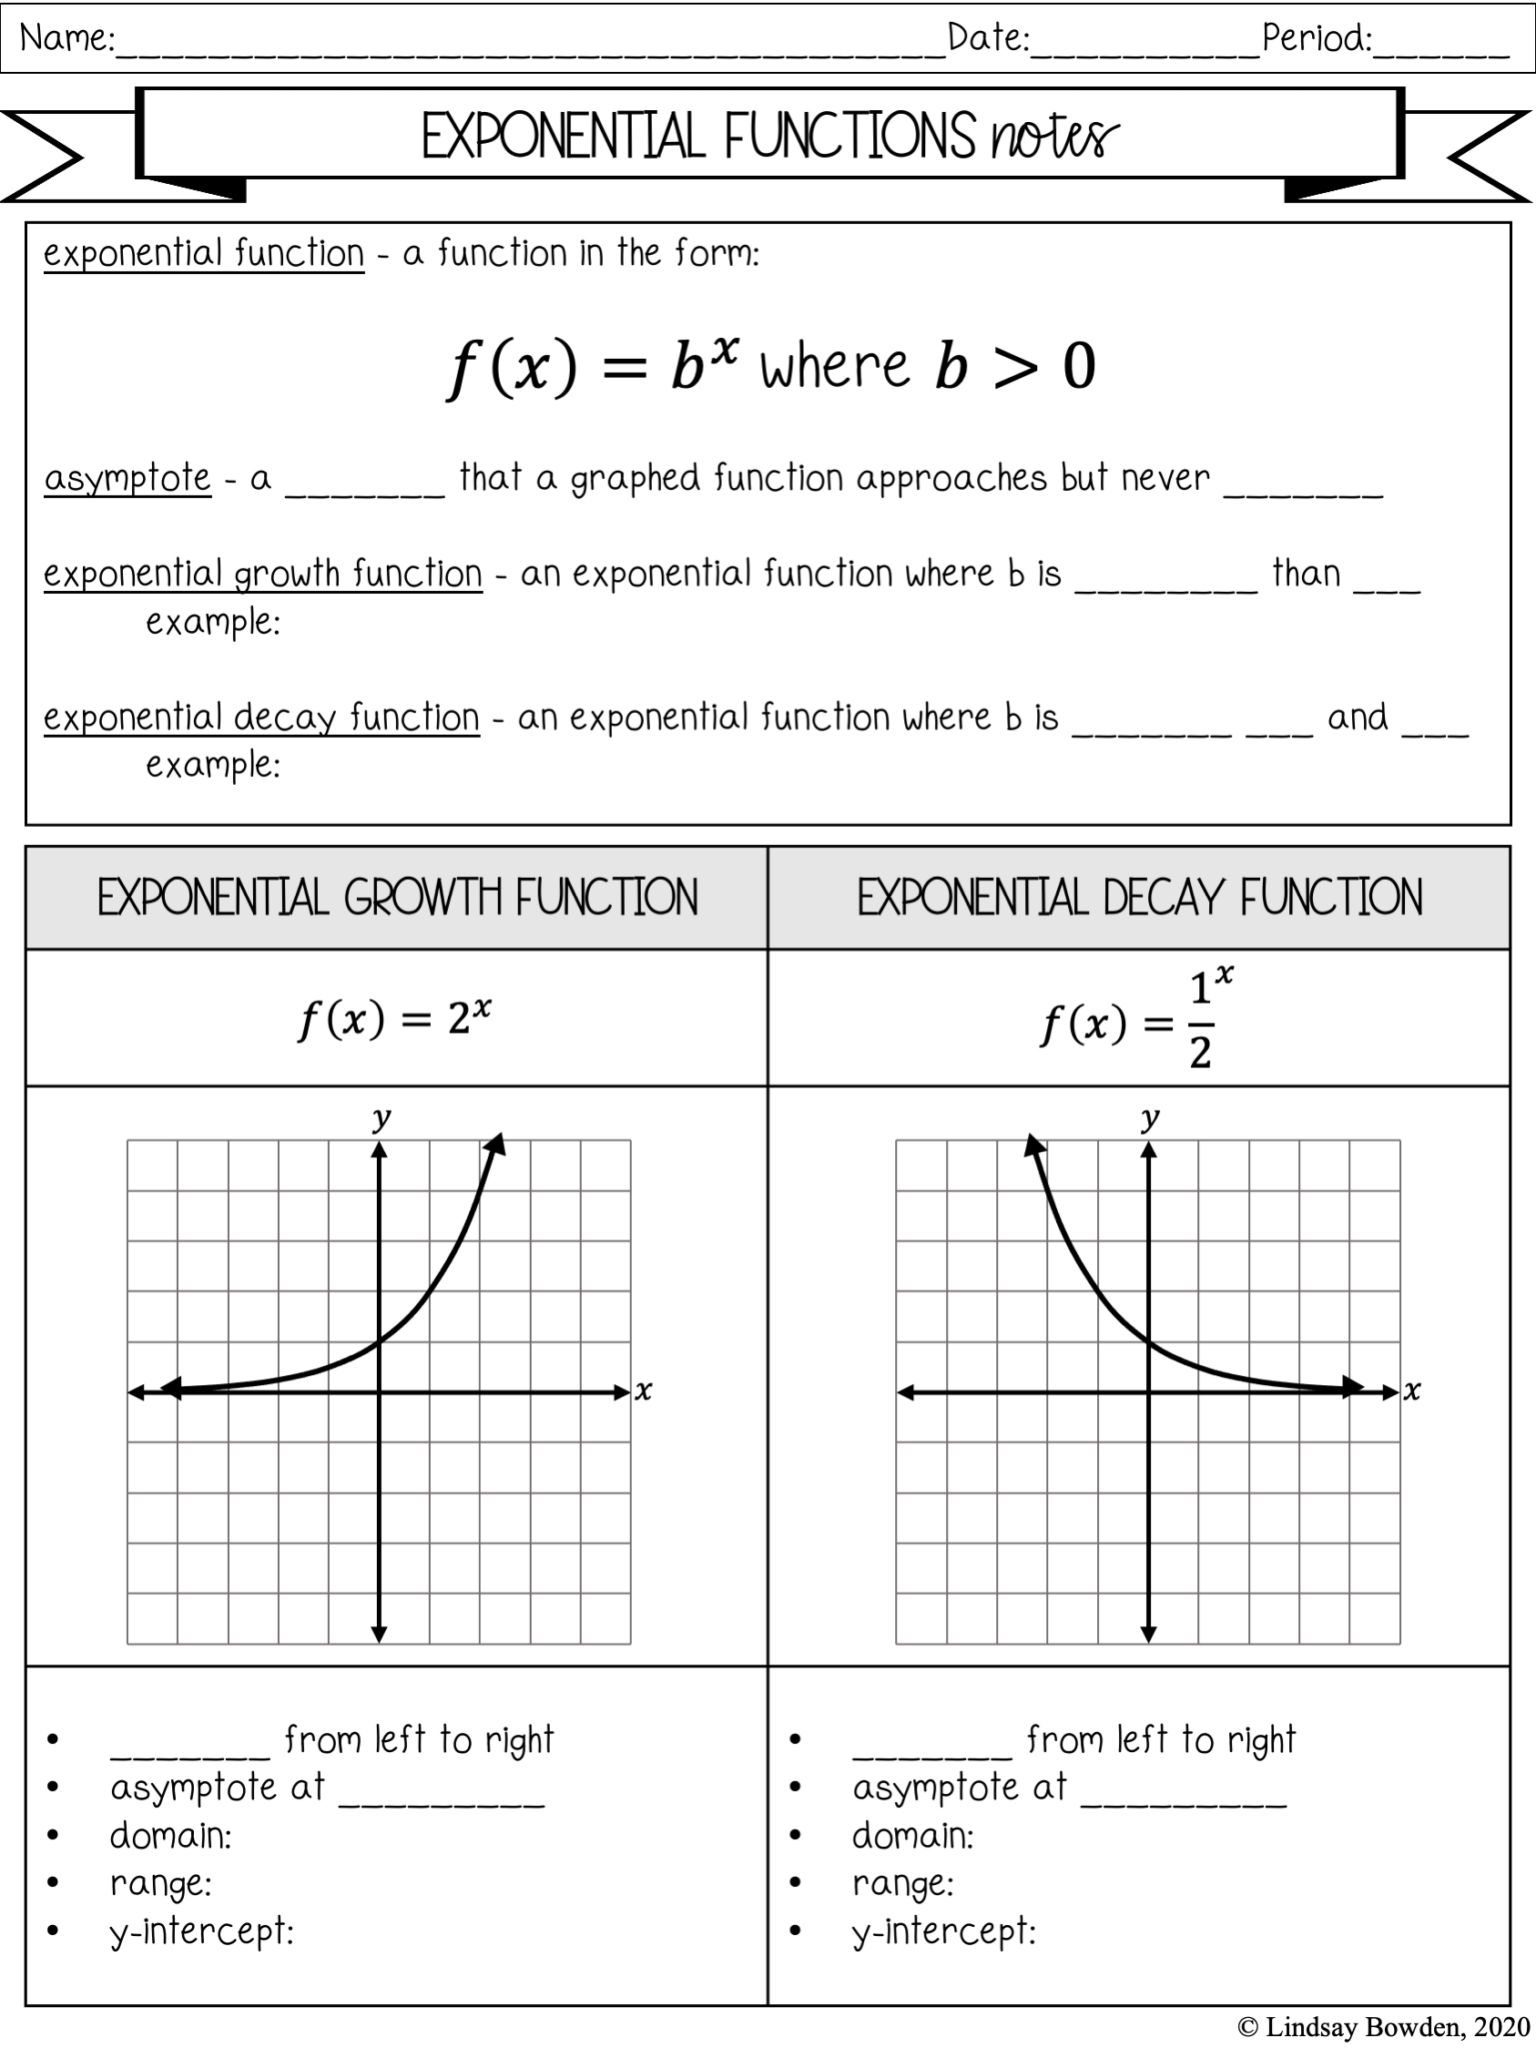 exponential-functions-notes-and-worksheets-lindsay-bowden